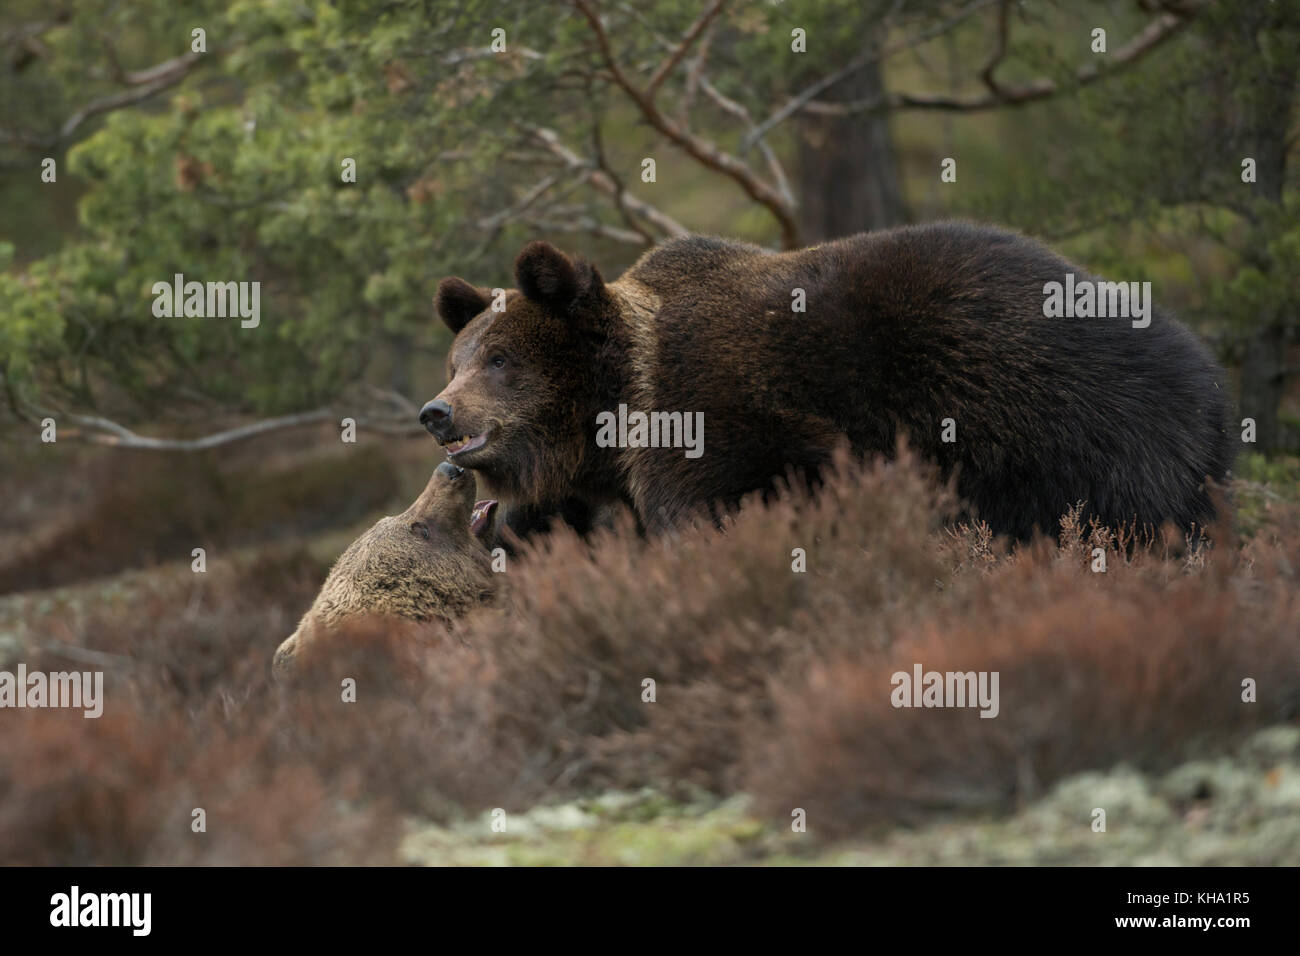 Eurasian Brown Bears / Europaeische Braunbaeren ( Ursus arctos ) fighting, struggling, in fight, in the shrubbery of a clearing in a forest, Europe. Stock Photo